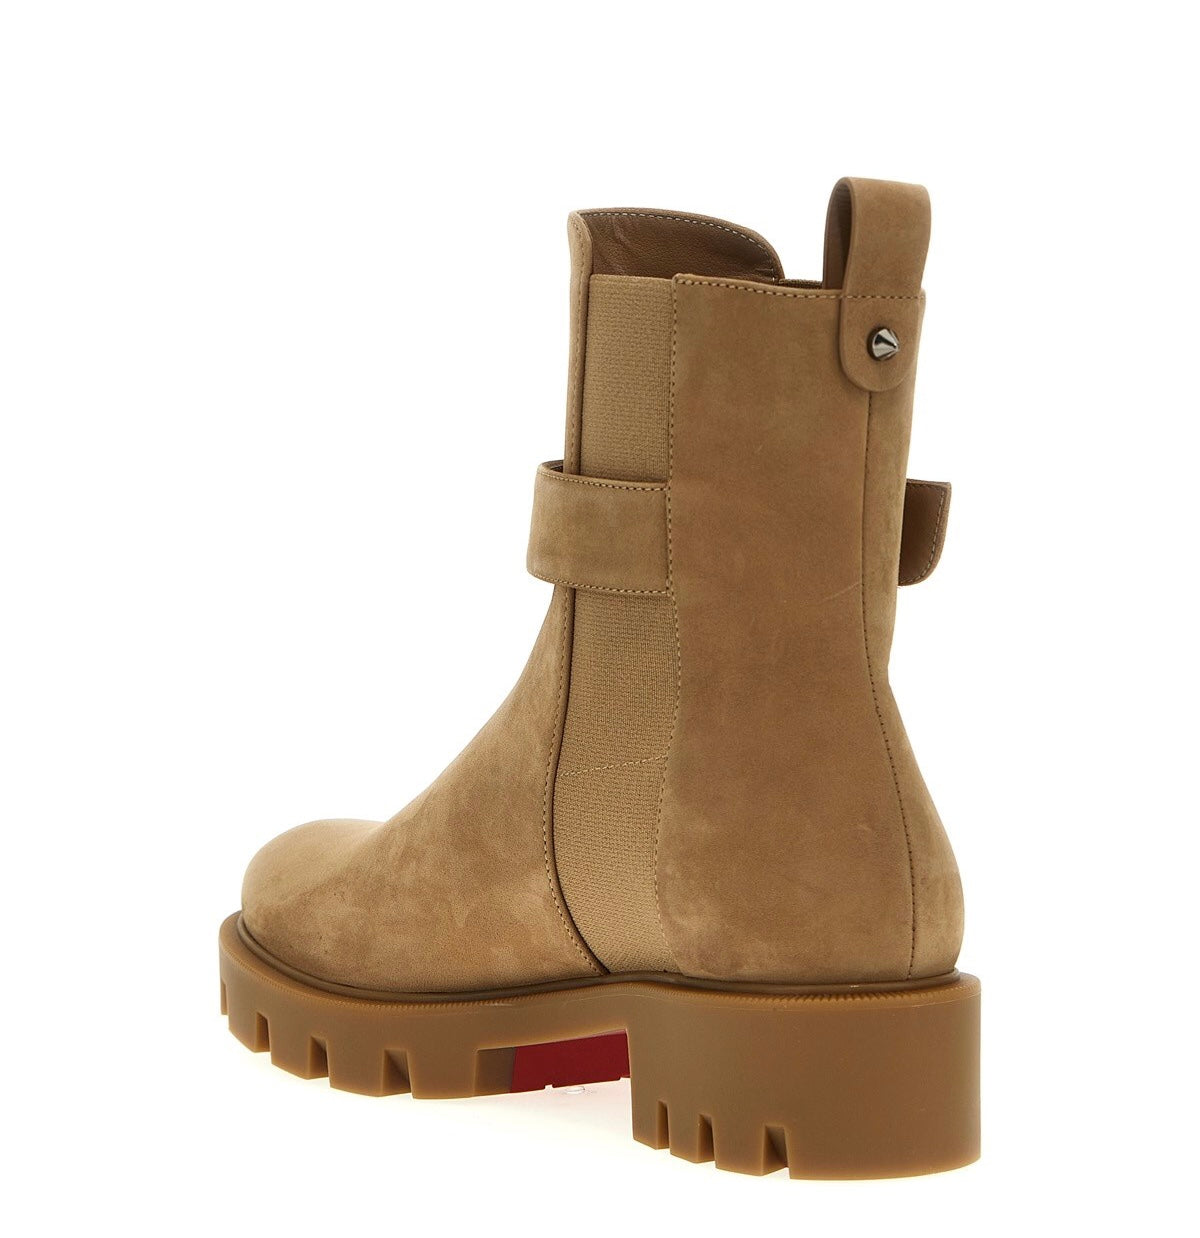 CHRISTIAN LOUBOUTIN CL LEATHER ANKLE BOOTS | JACQUESTINE BOUTIQUE